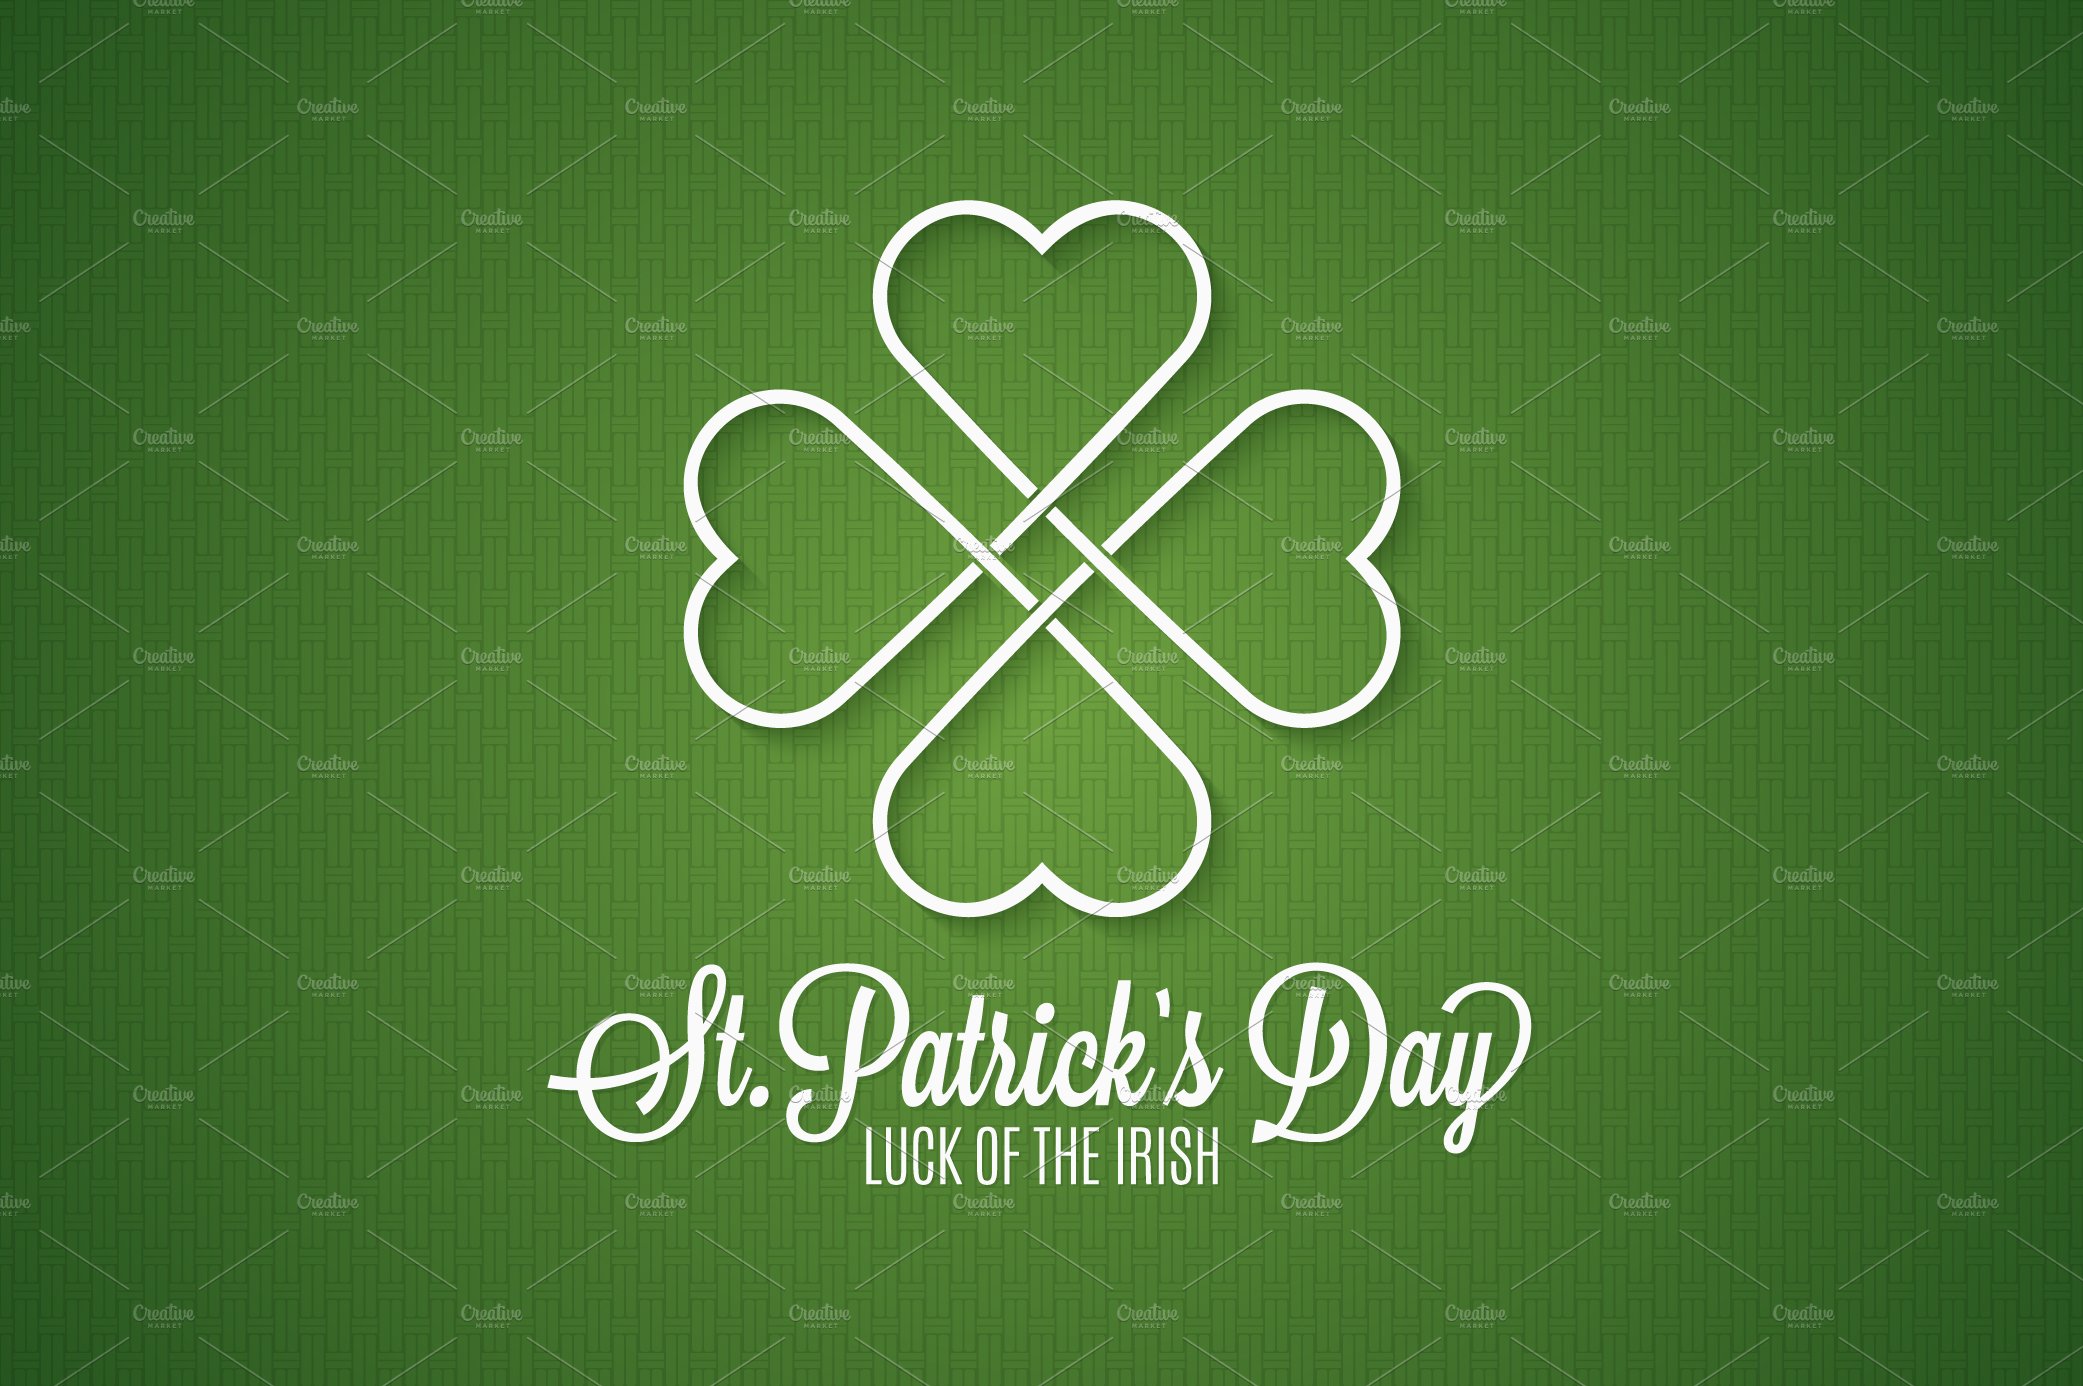 Patricks day background cover image.